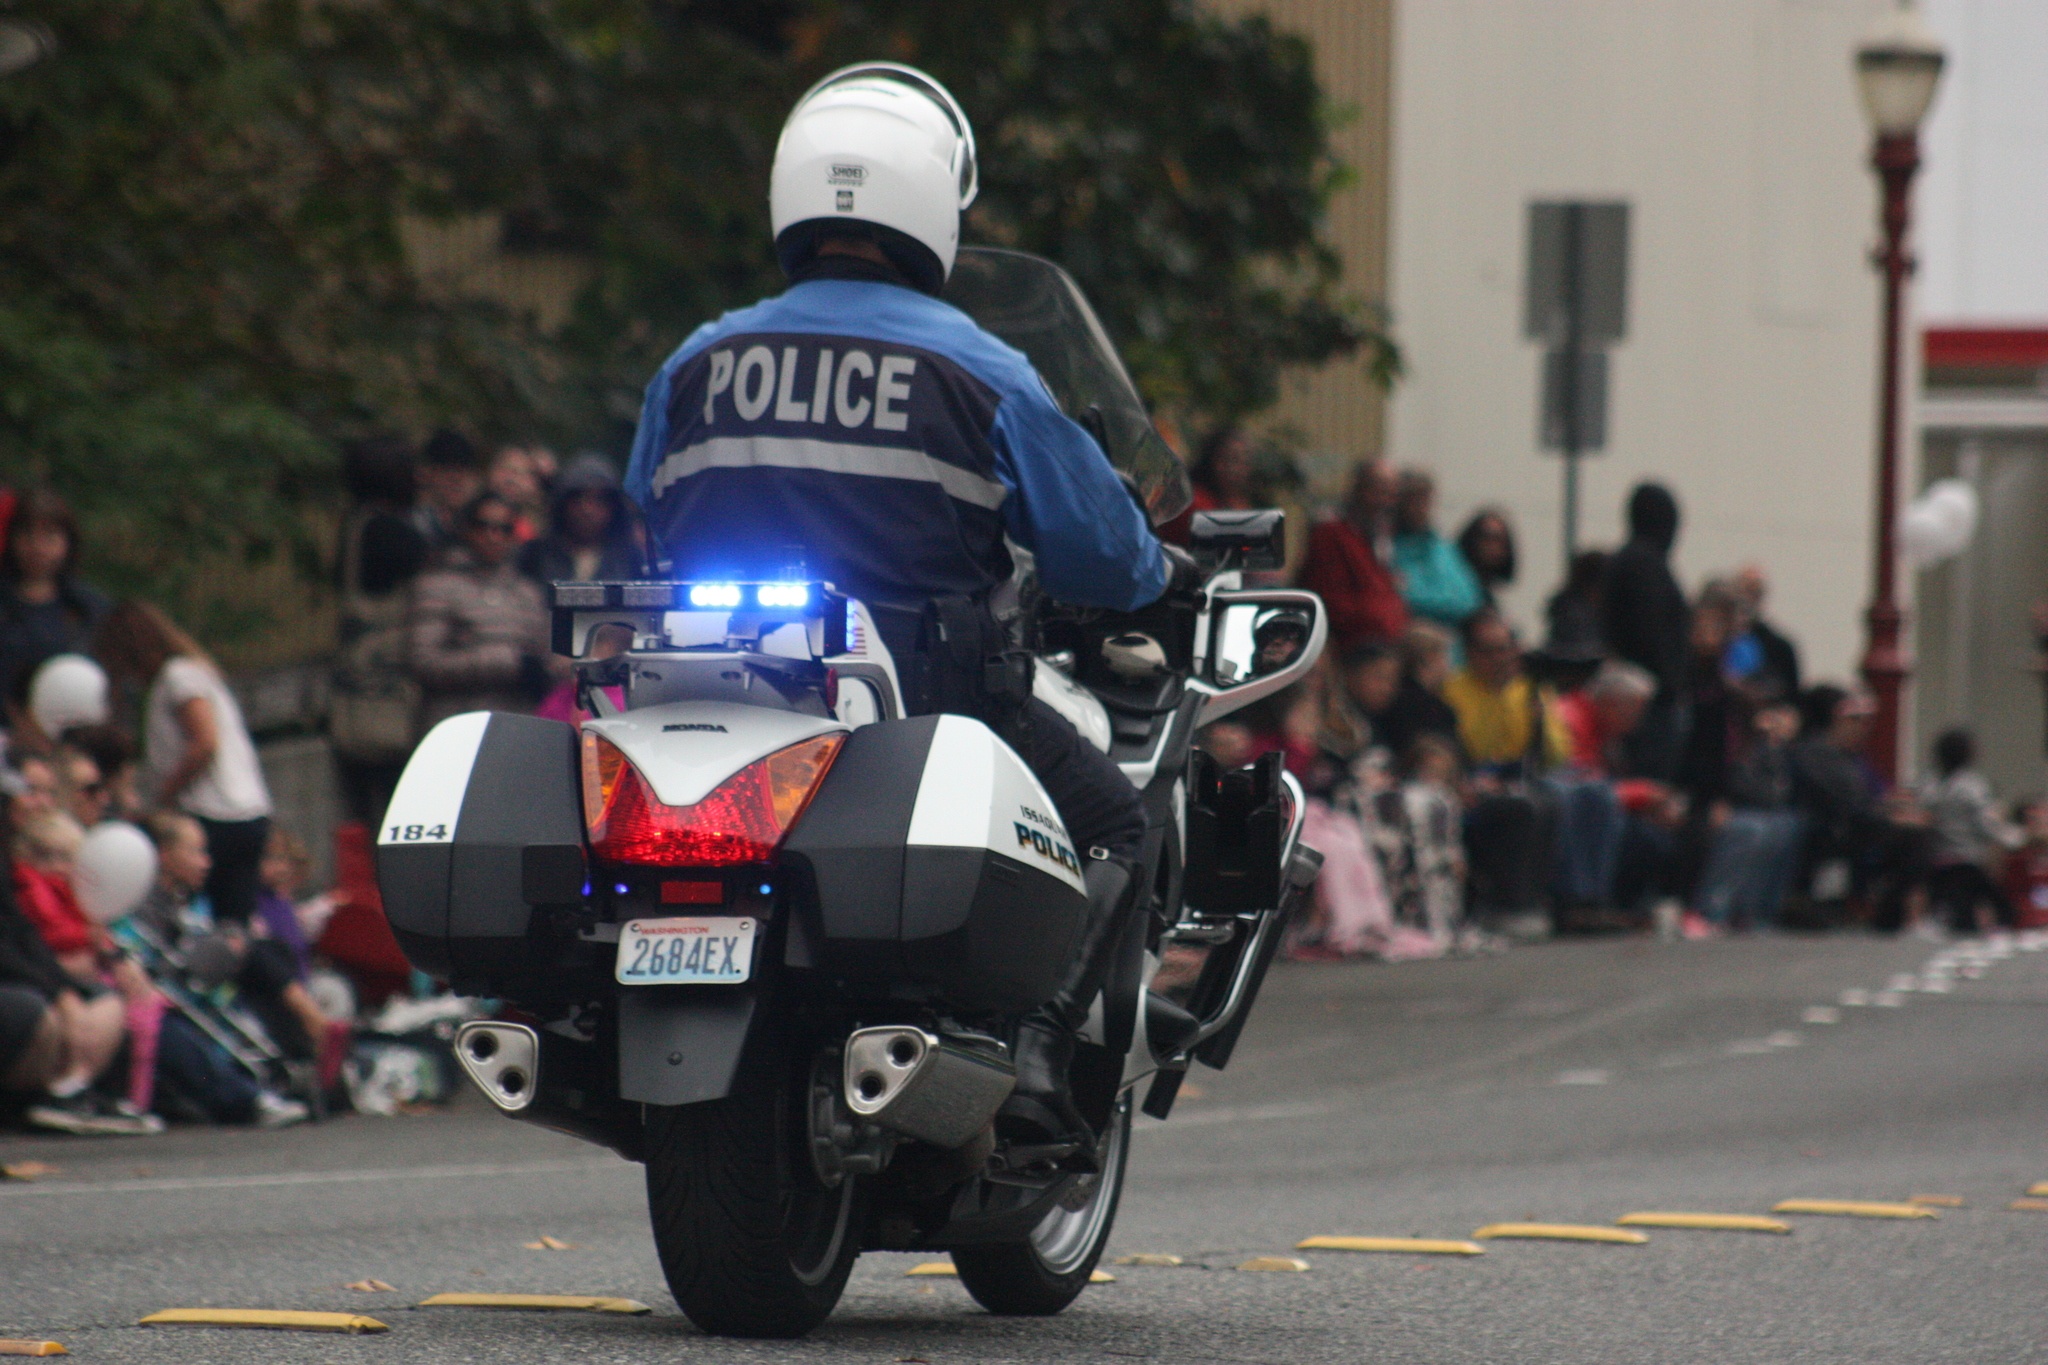 An Issaquah police officer on a motorcycle. File photo